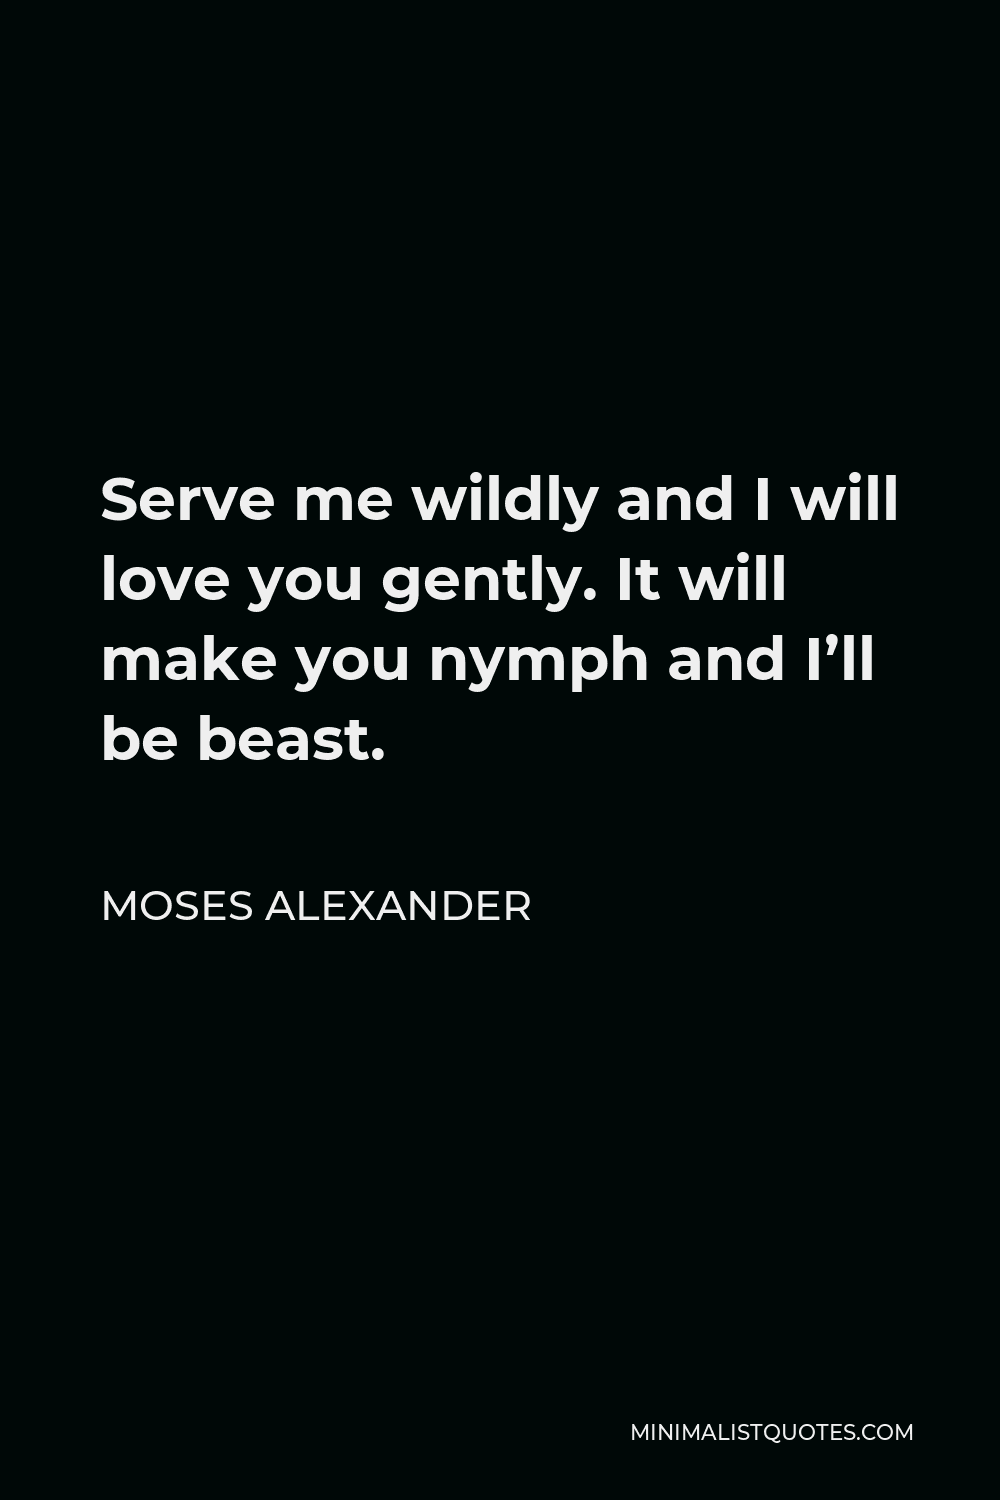 Moses Alexander Quote - Serve me wildly and I will love you gently. It will make you nymph and I’ll be beast.